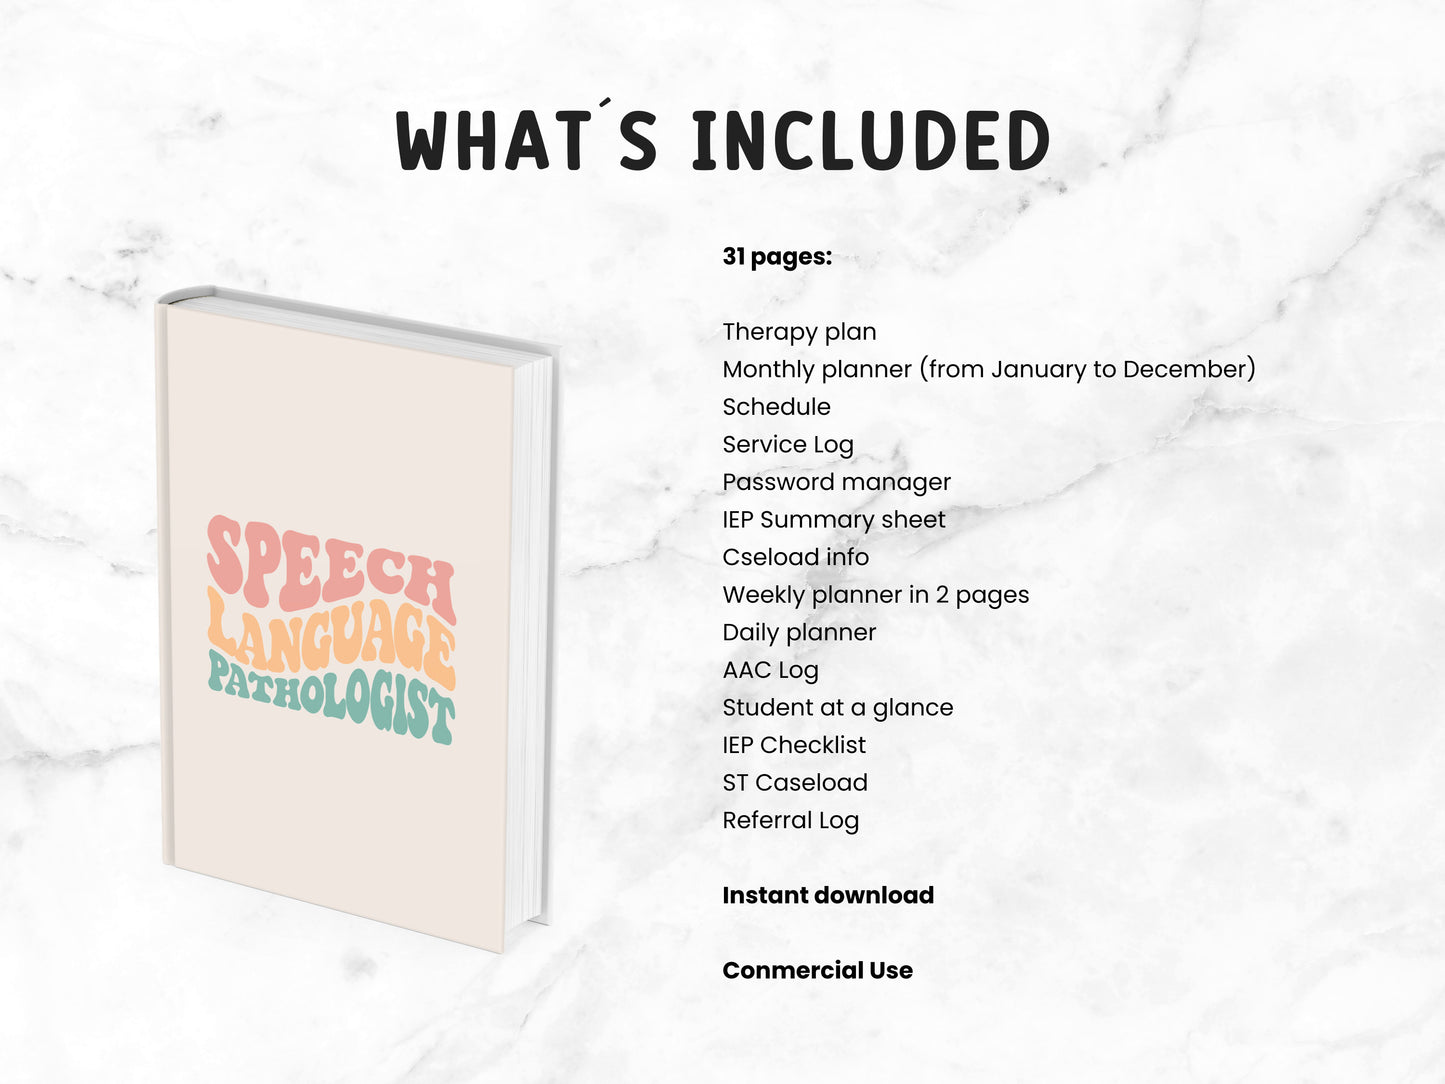 Speech Therapy Canva Printable Planner Template